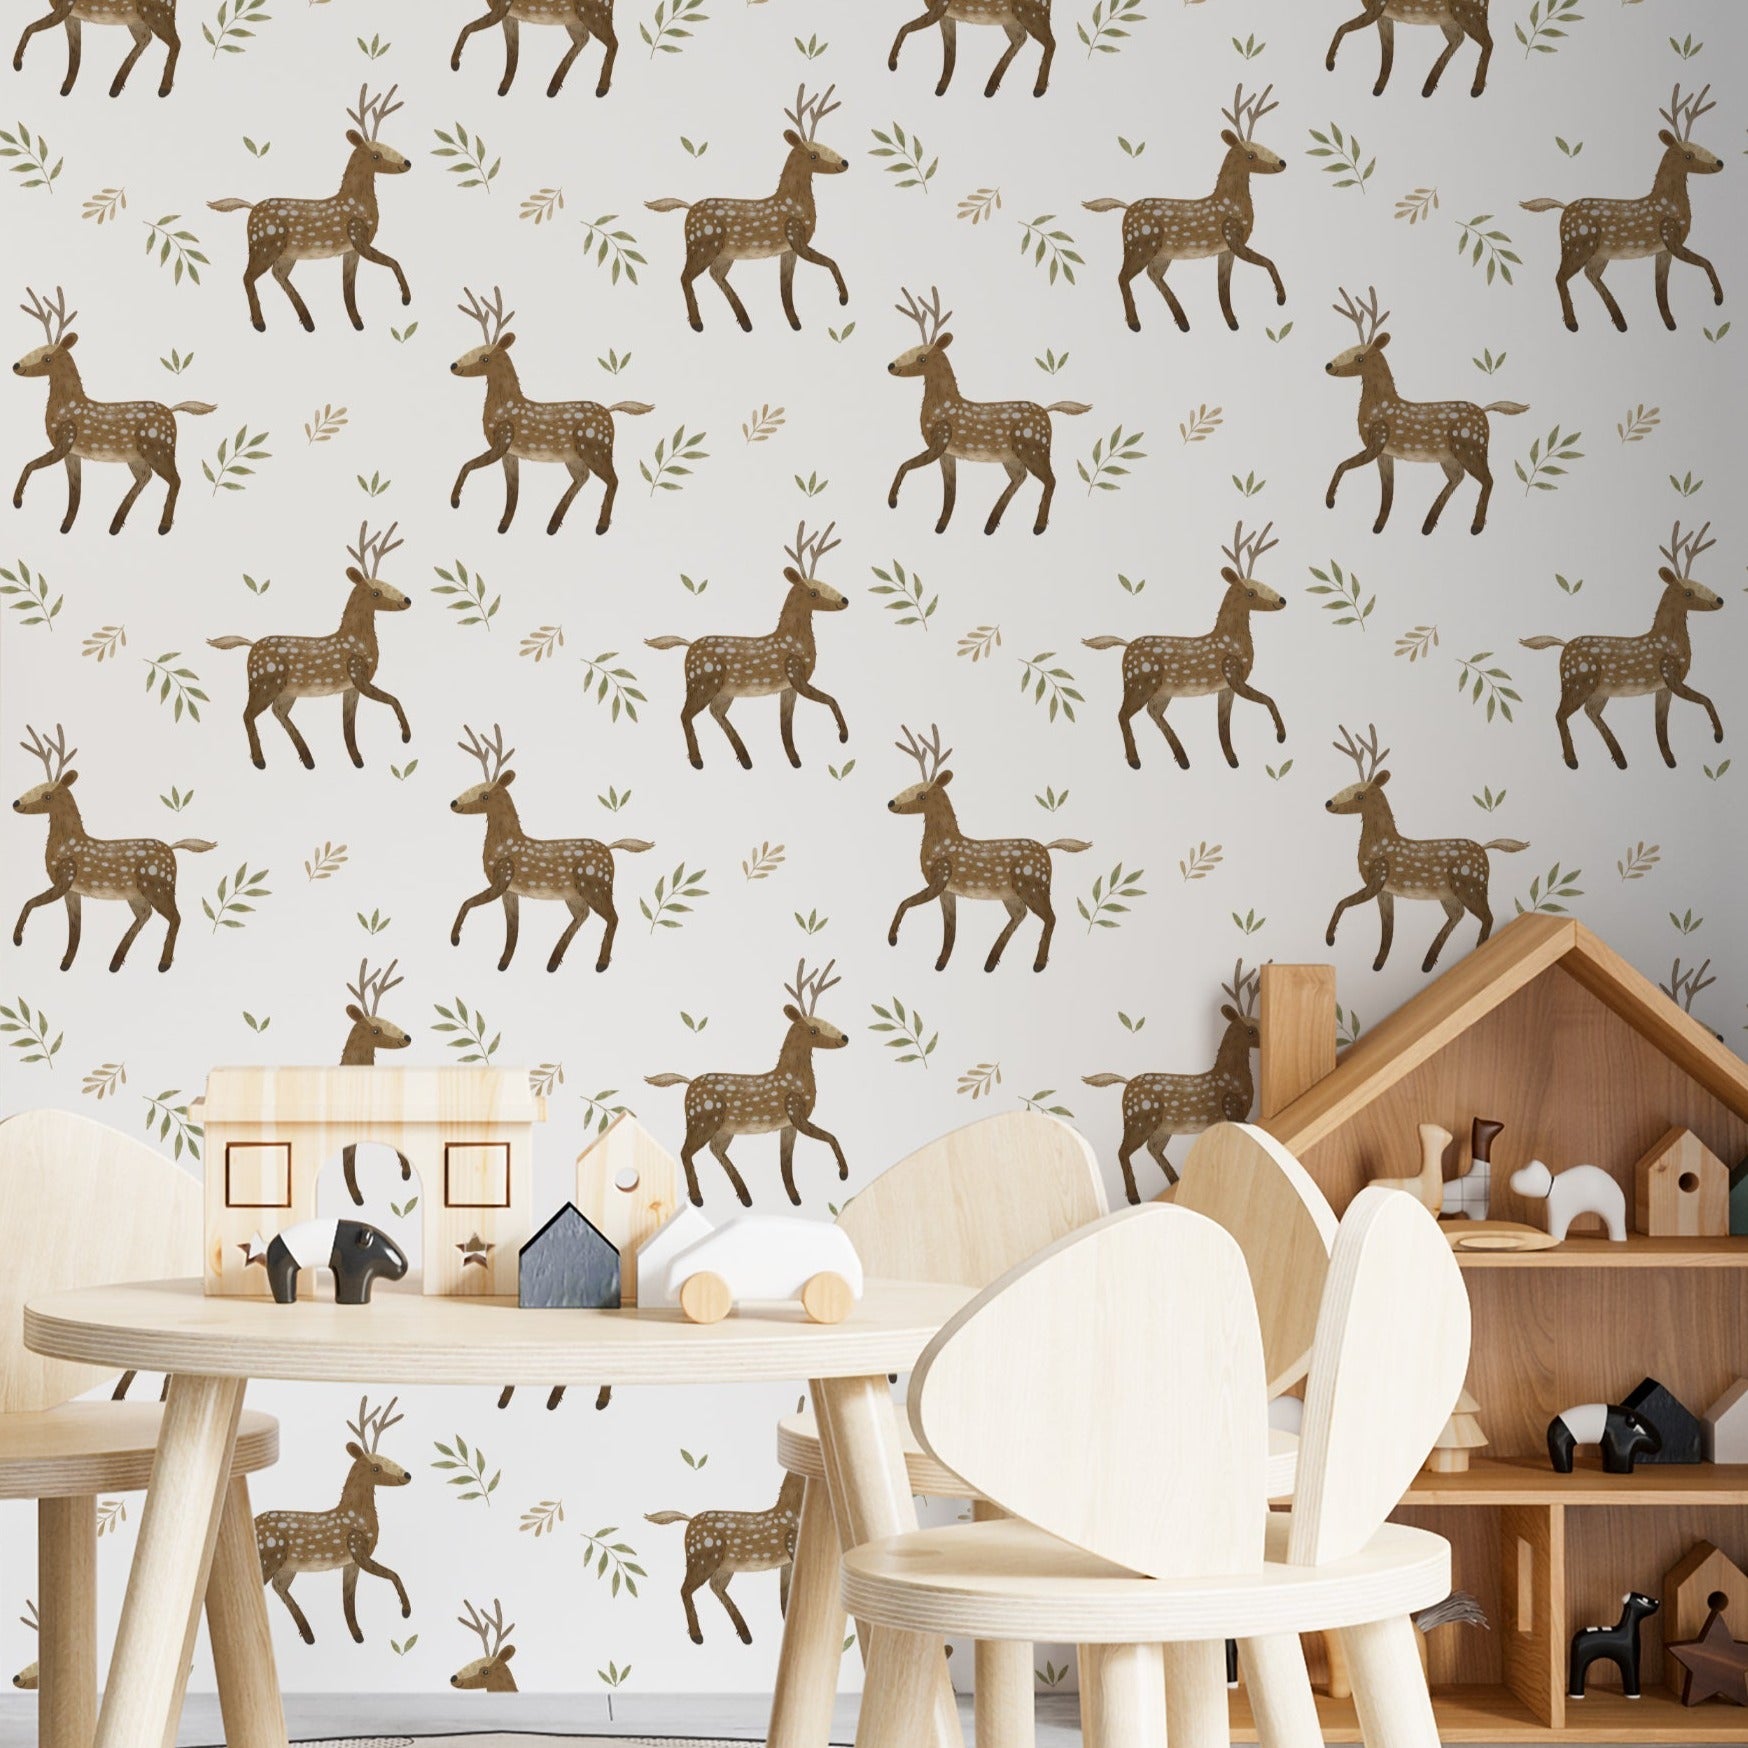 Decorative setup showcasing the Forest Stag Wallpaper in a children’s playroom. The wallpaper’s pattern of stags and foliage complements a playful environment featuring wooden toys and furniture, enhancing the room’s natural and adventurous theme